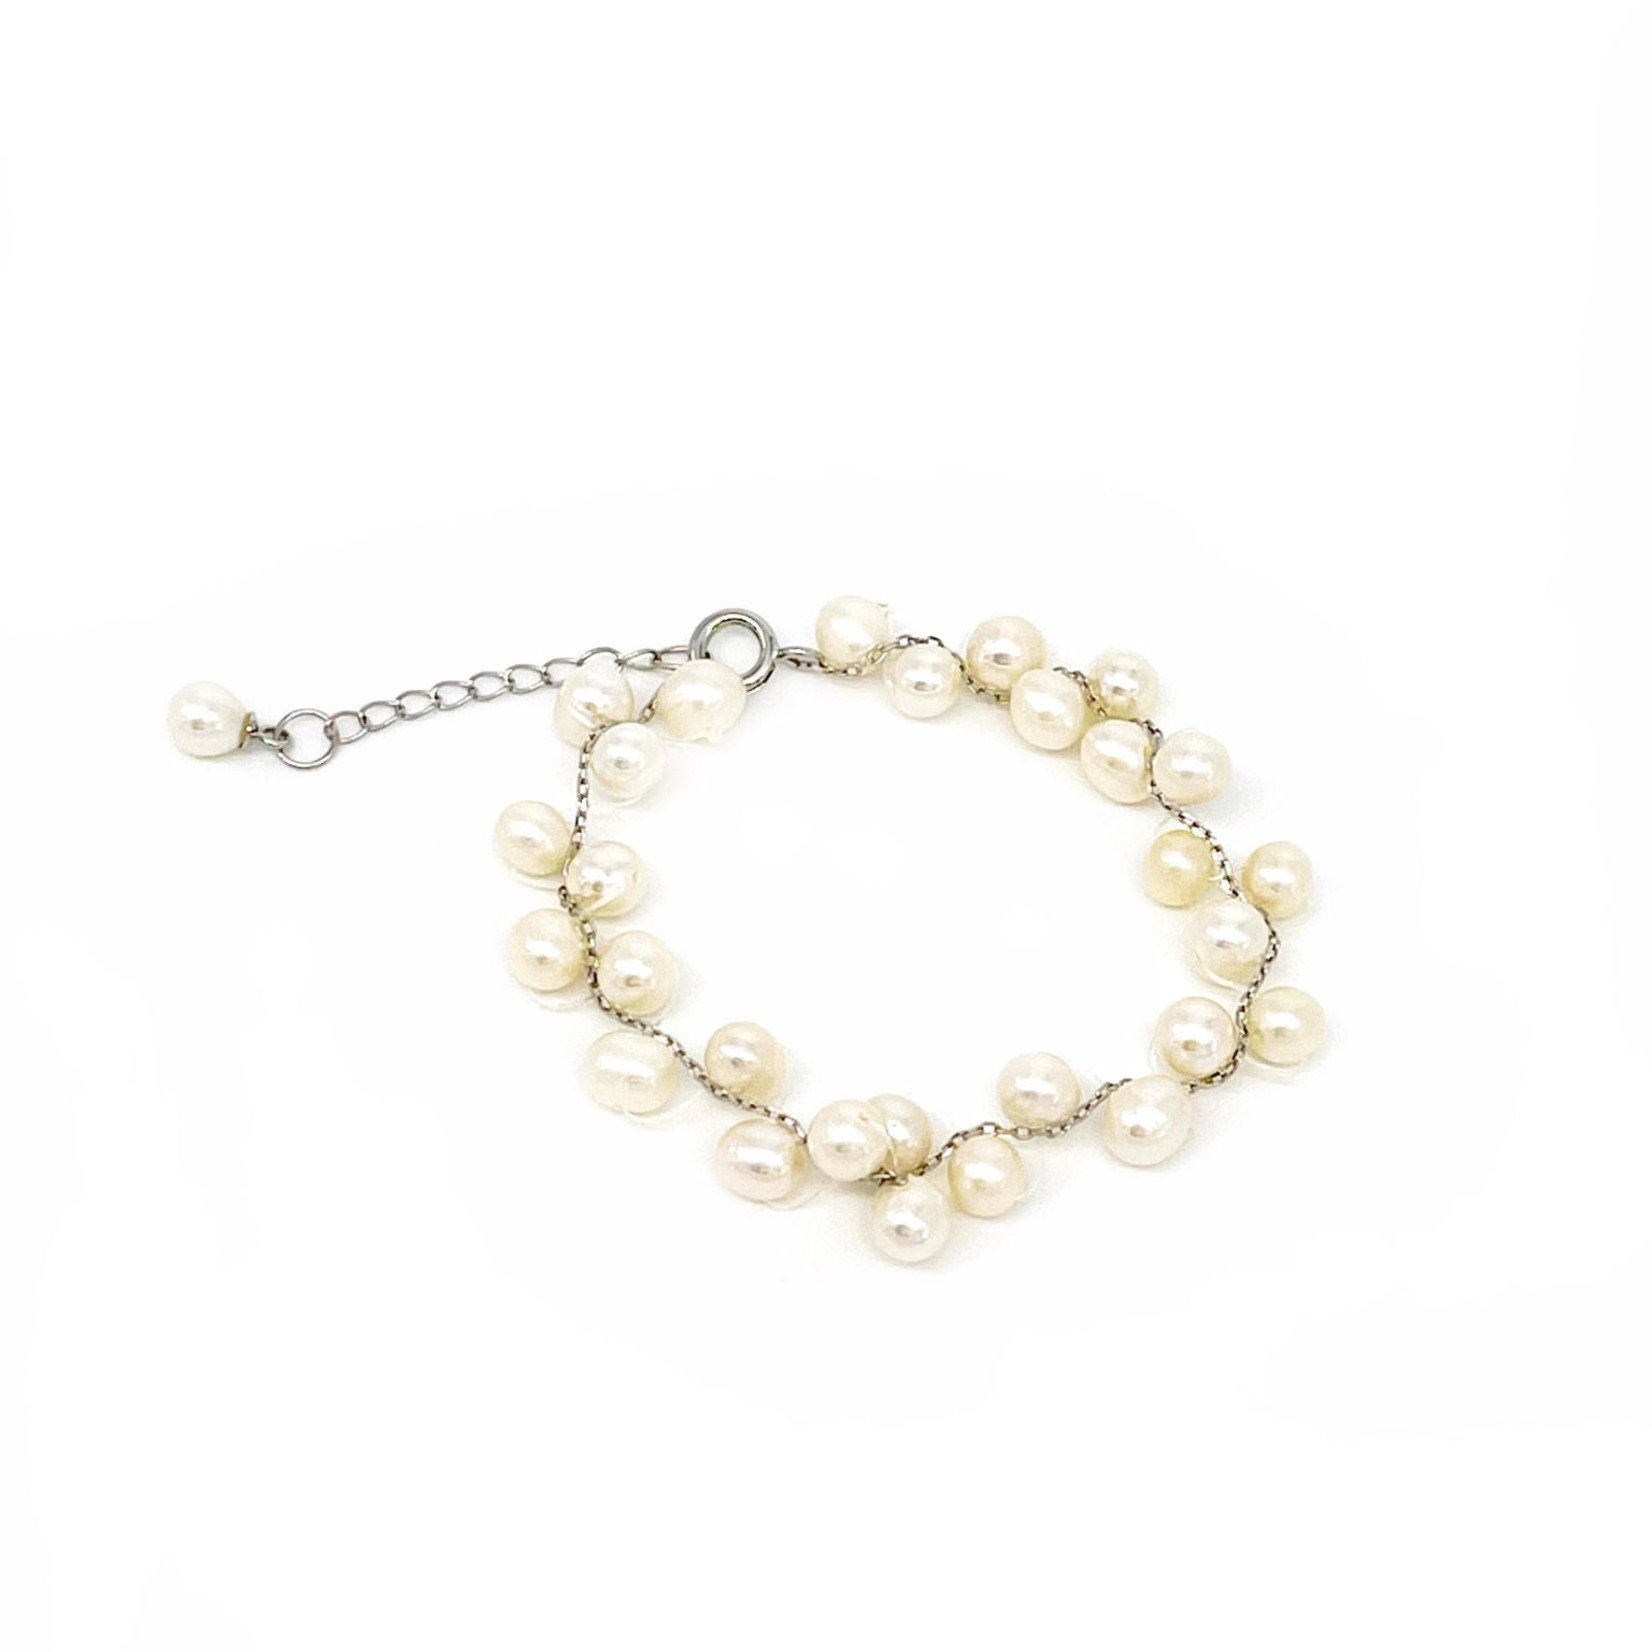 5.5-6mm Sterling Silver Chain Braided Pearl Adjustable Bracelet